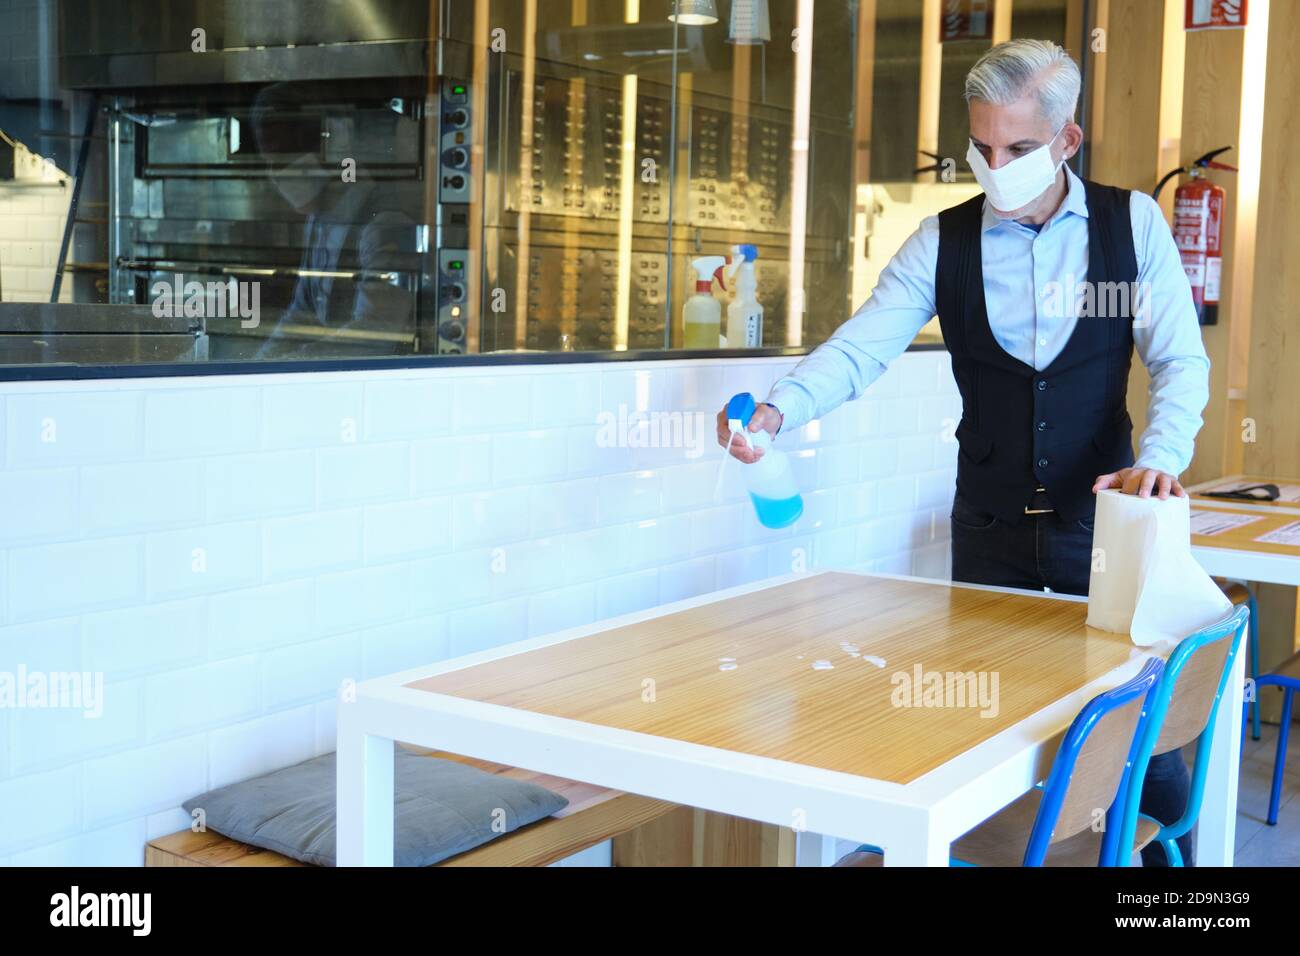 Caucasian male worker cleaning table with disinfectant in a restaurant during coronavirus outbreak. Waiter in protective mask disinfecting table with Stock Photo